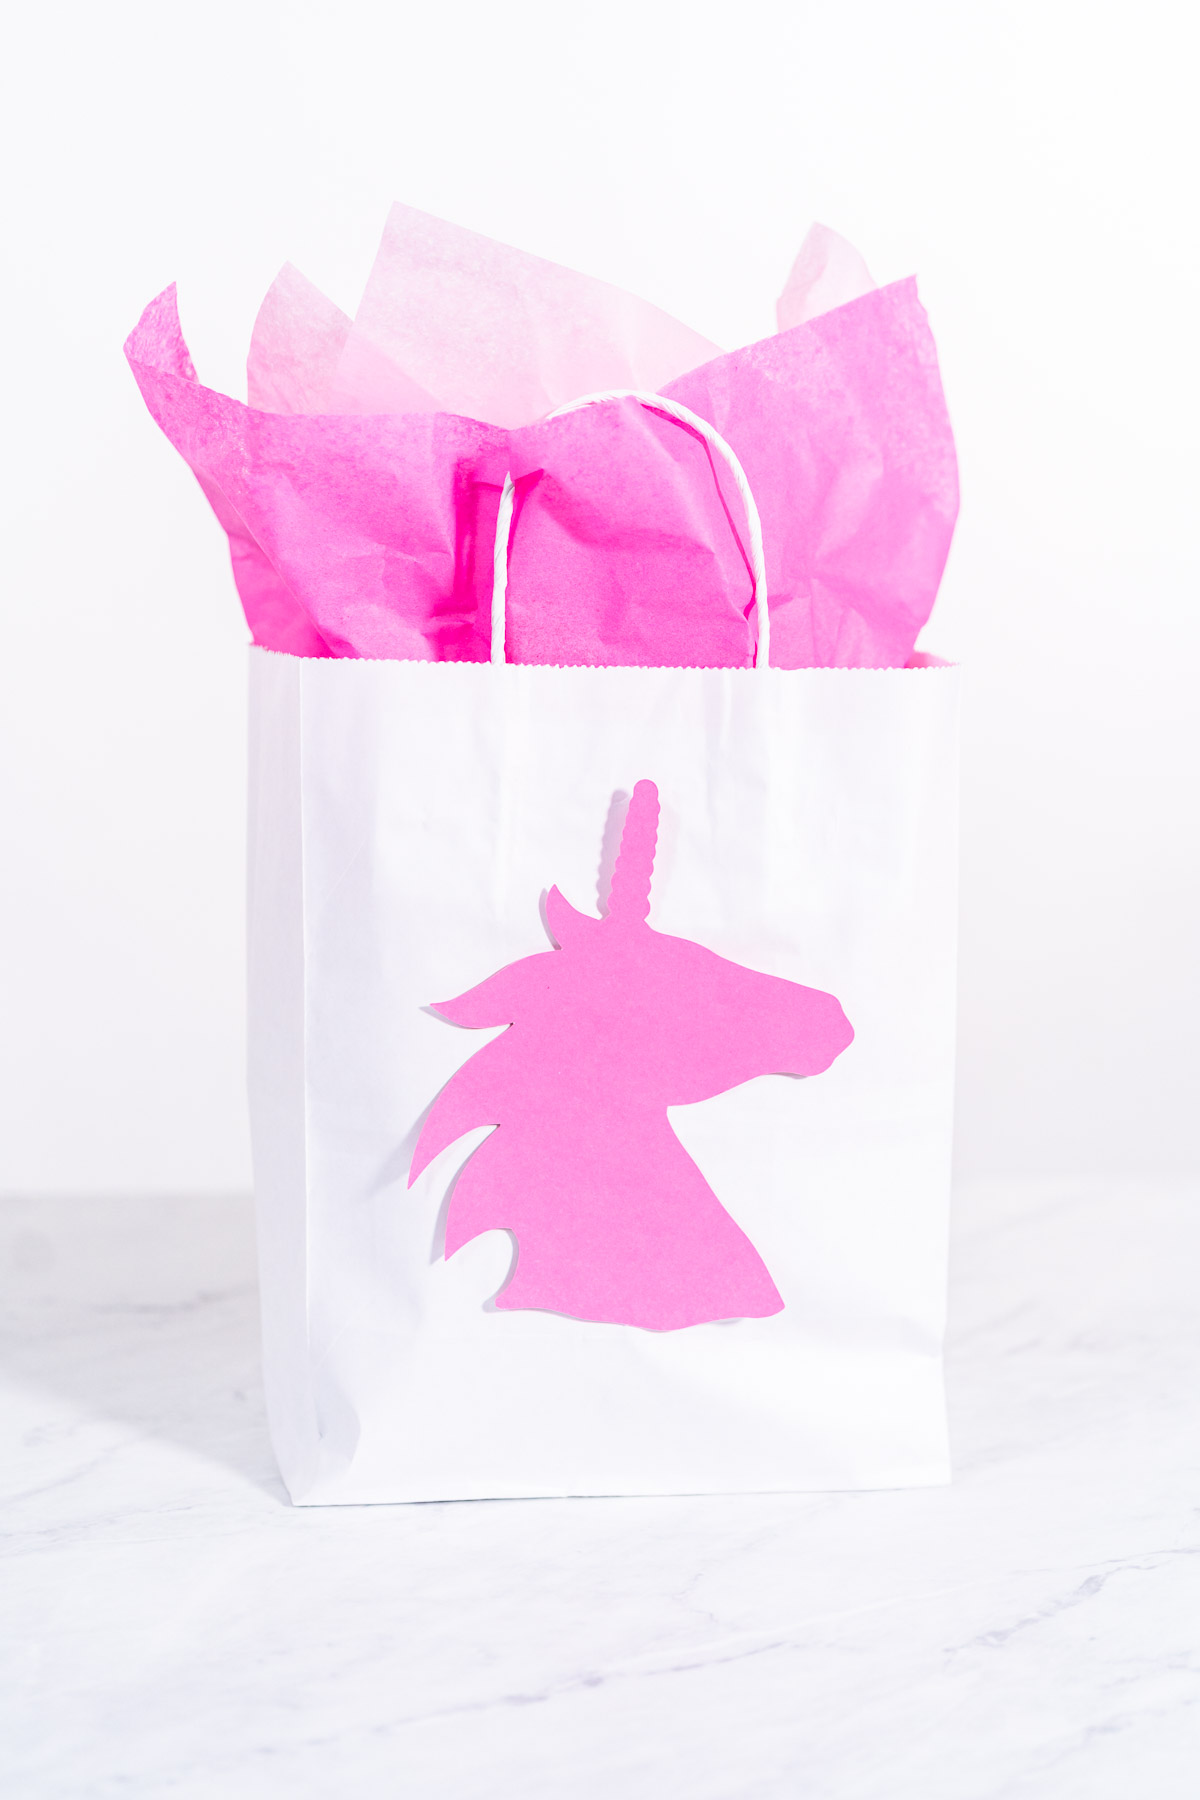 Amazon.com: Lianxuia 6 Pcs Unicorn Gift Bags with Handles, 12.6 Inch Large  Birthday Gift Bag with Greeting Card and Tissue Paper, Favor Bags for Girls  Kids Birthday Party Supplies : Health & Household